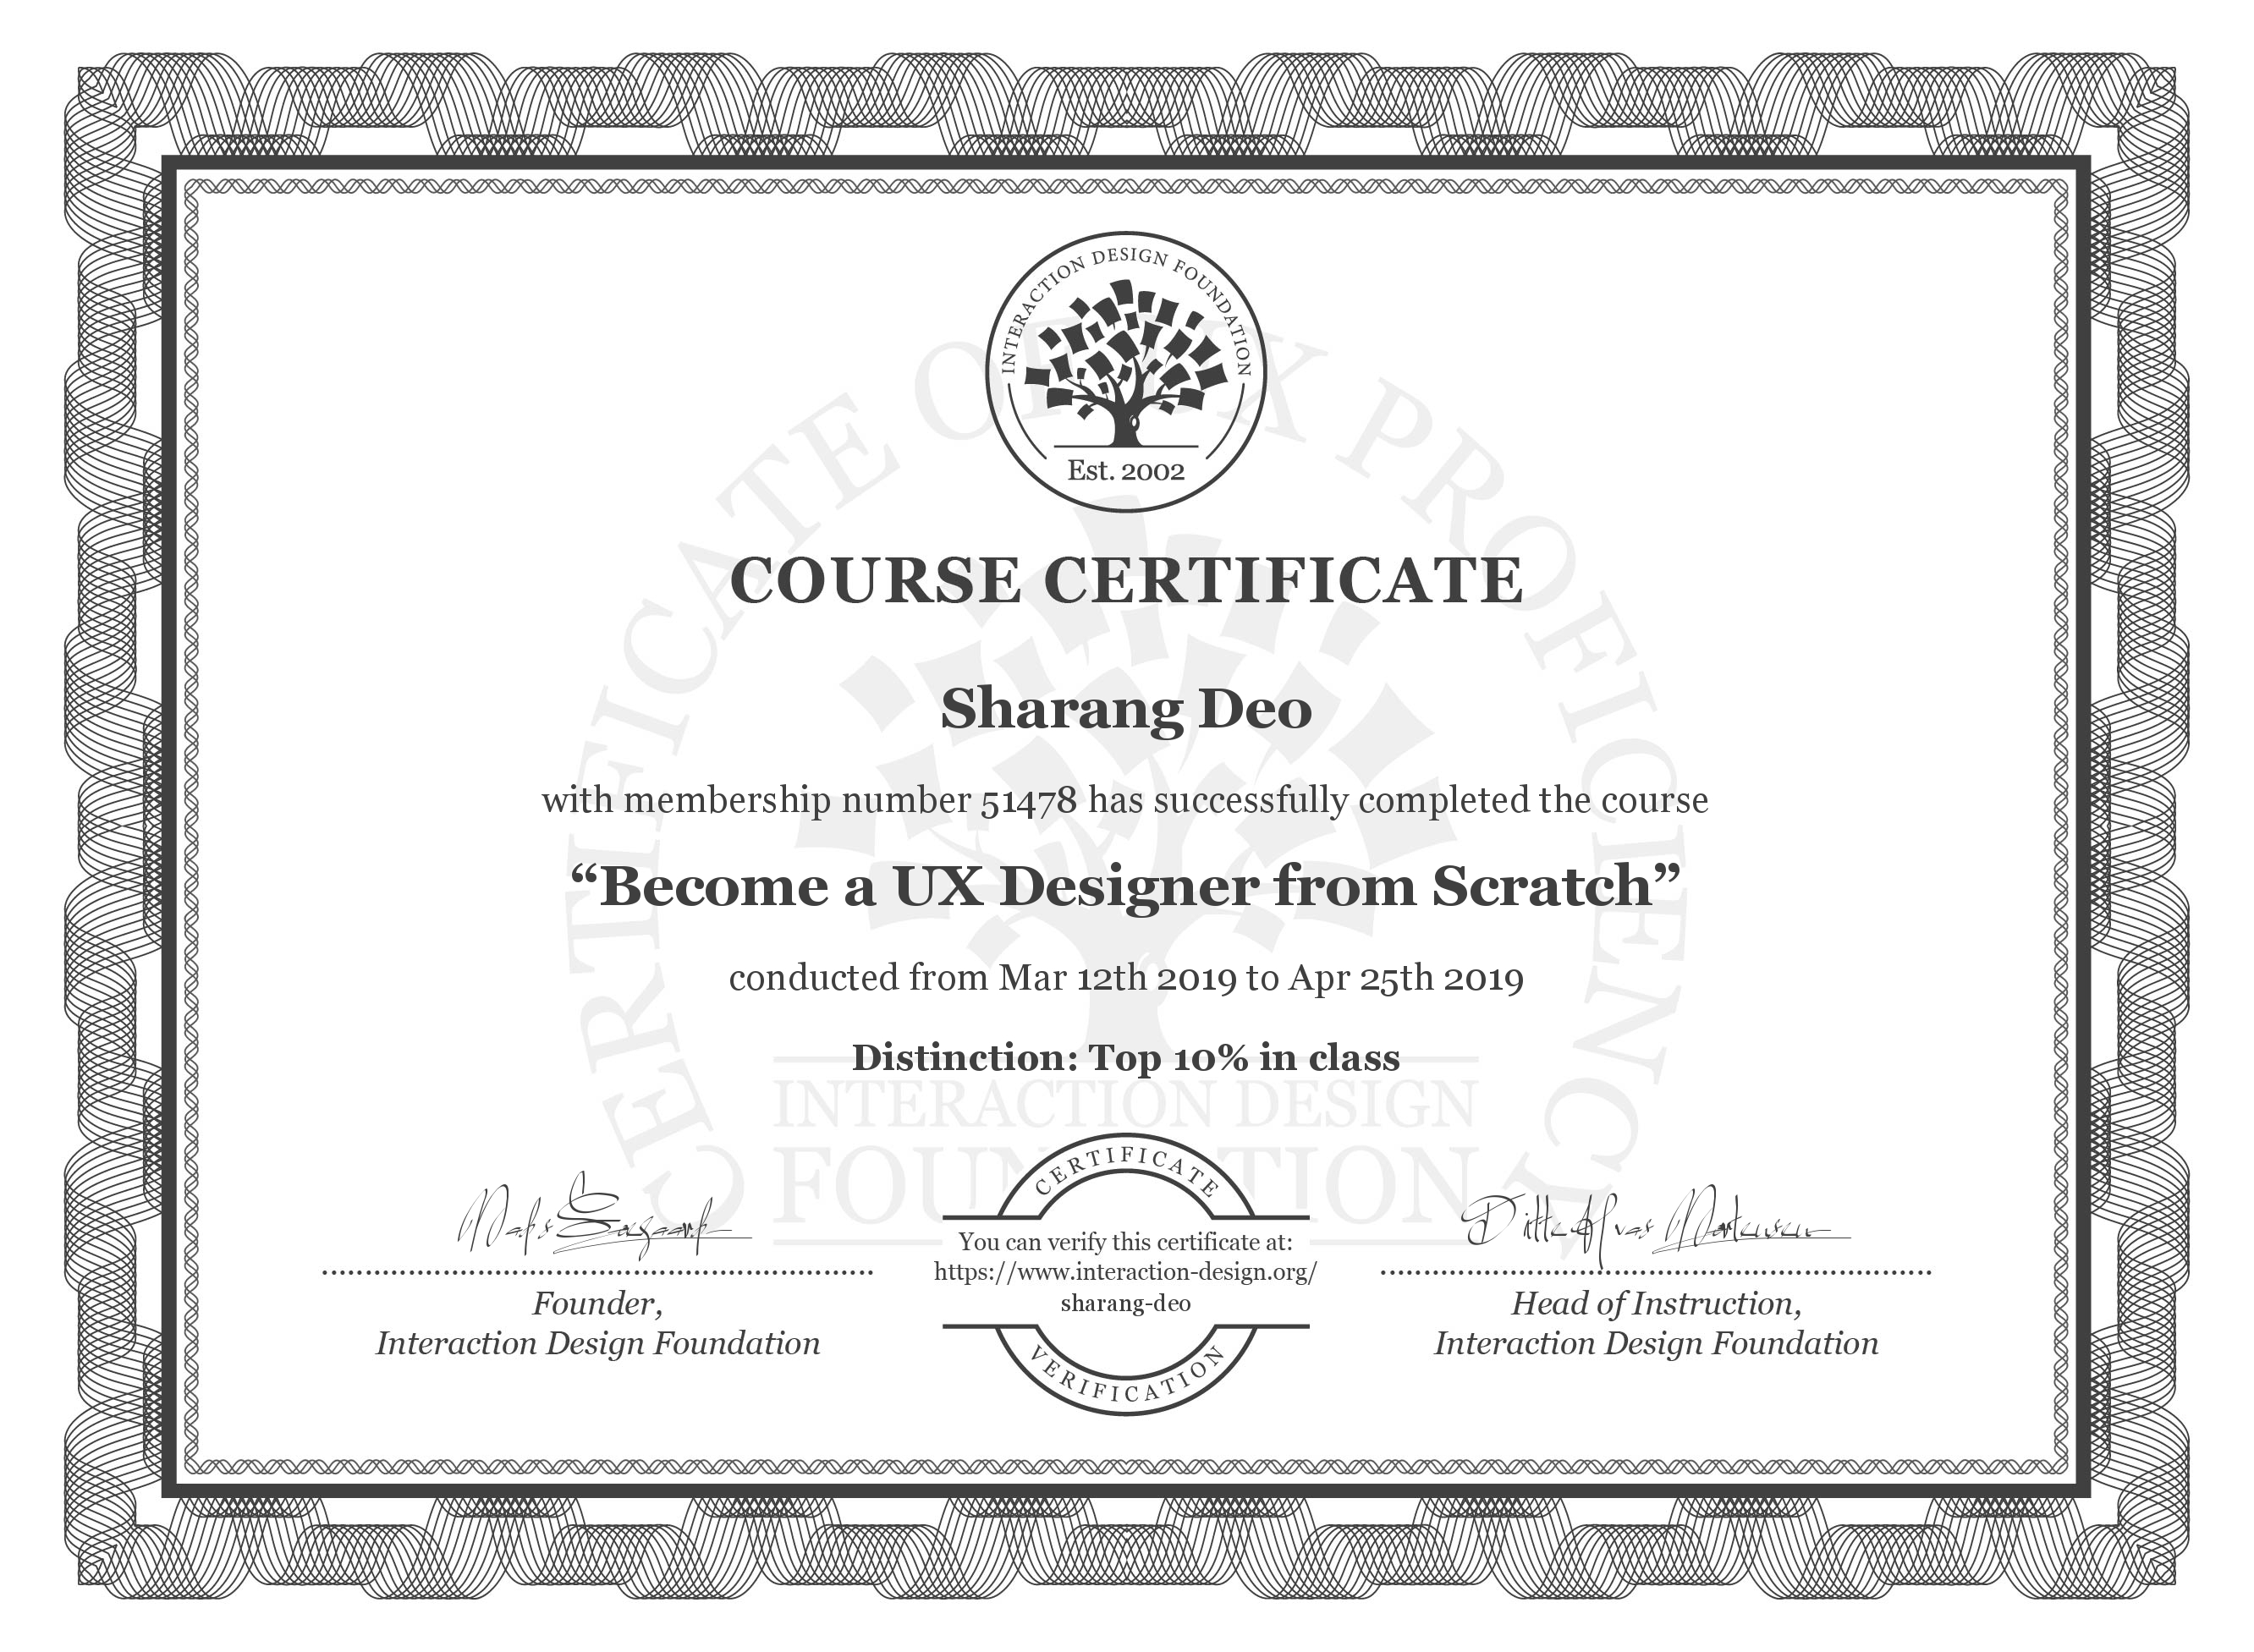 Sharang Deo - Become a UX Designer from Scratch.jpg